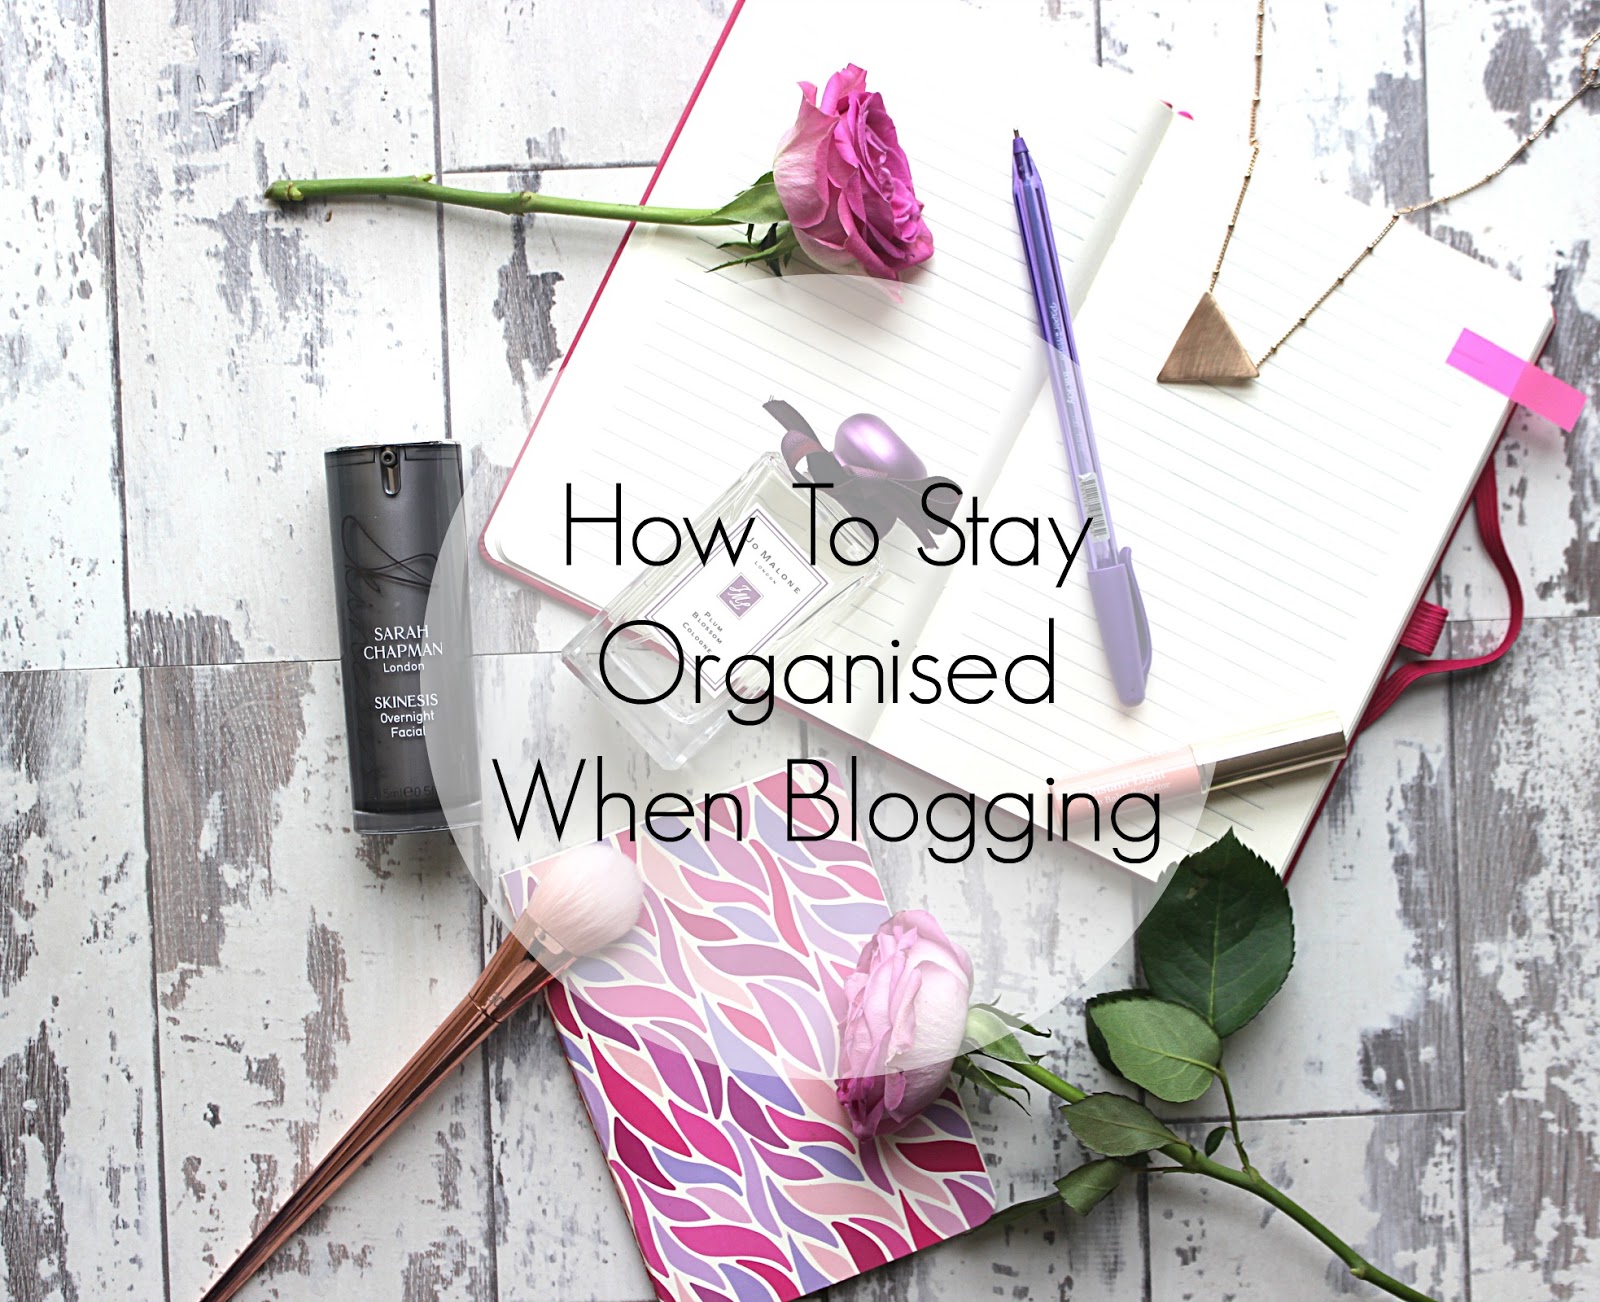 How To Stay Organised When Blogging